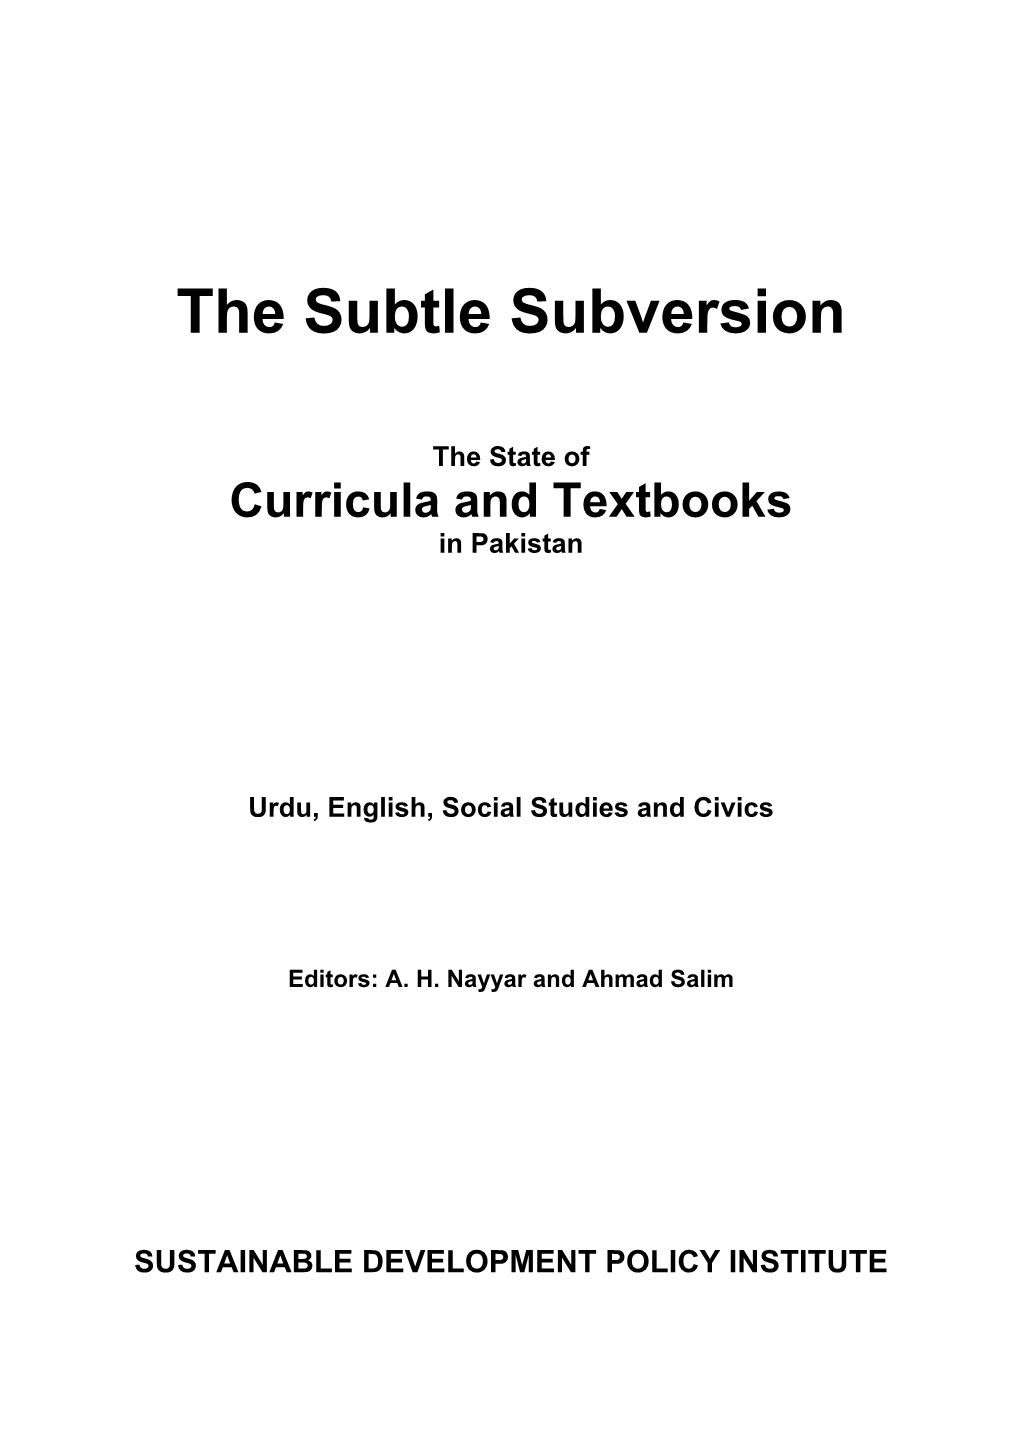 The Subtle Subversion (The State of Curricula and Textbooks in Pakistan)